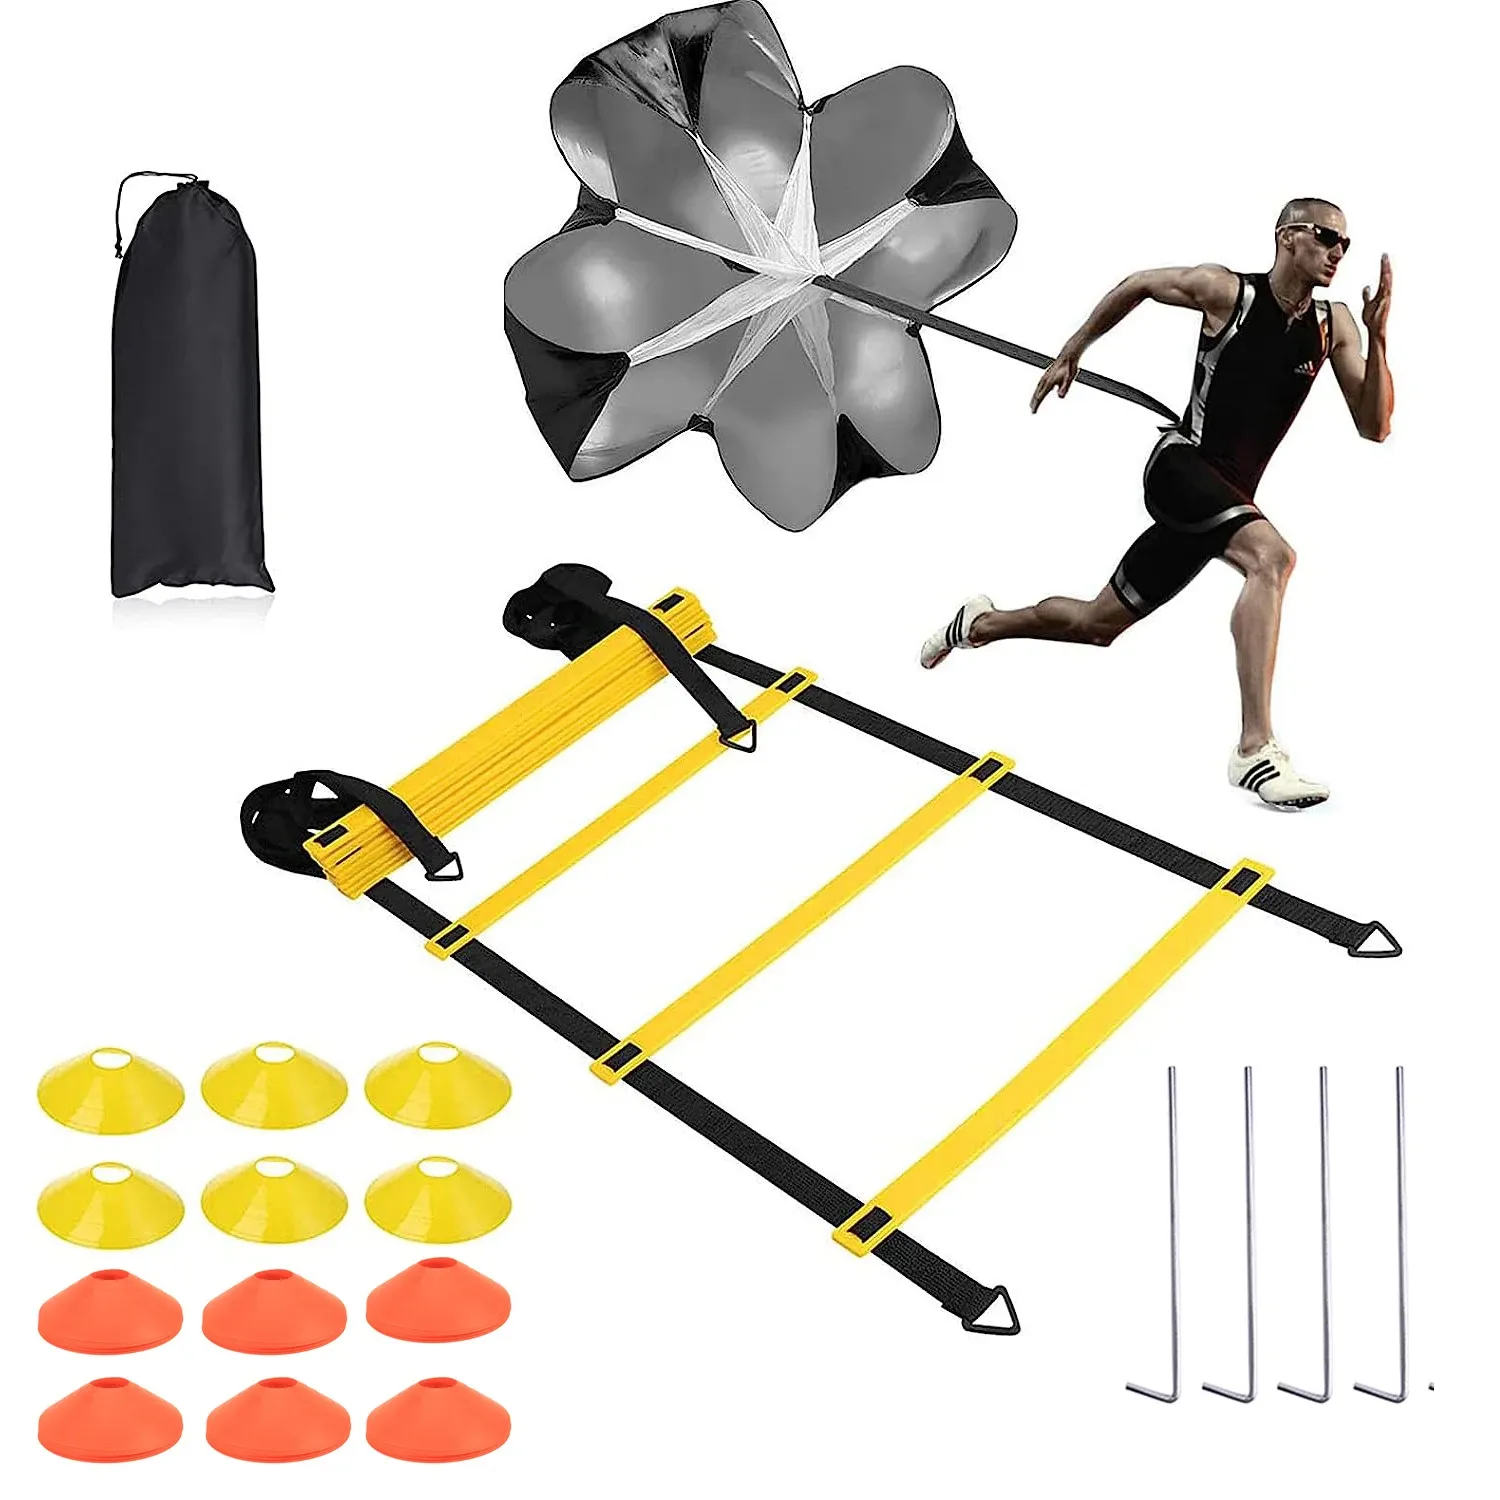 Equipment Flexibility Speed Soccer Training Equipment Set Agility Speed Ladder Parachute Exerciser Sport Obstacles Football Accessories